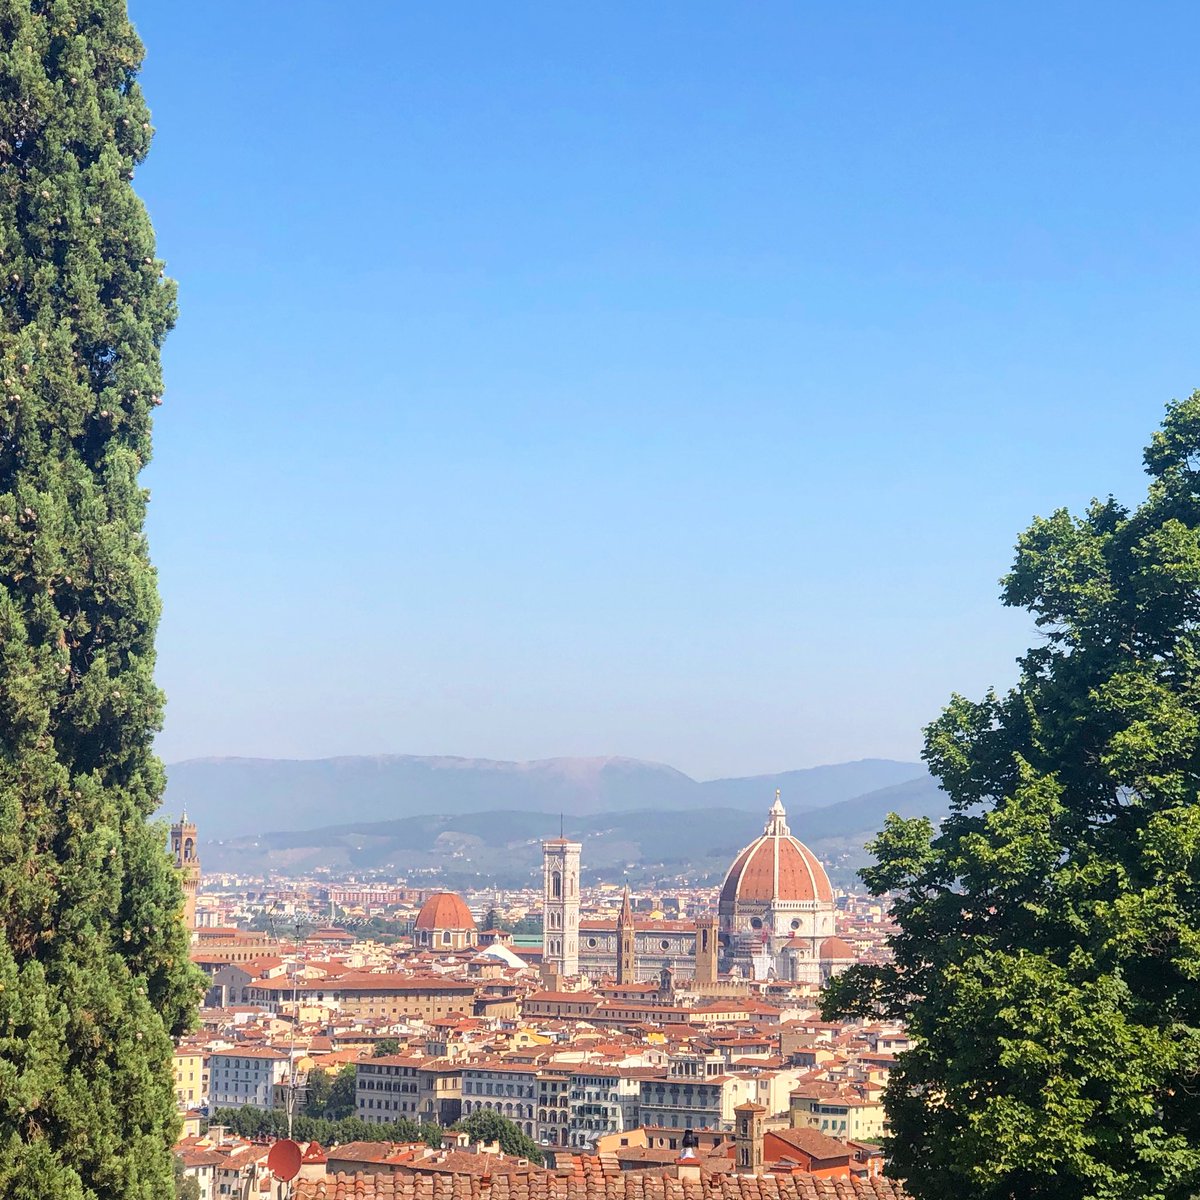 Experience a wonderful day trip to Florence with one of our drivers #tuscandrivers #localtannins #florence #instaflorence #tuscany